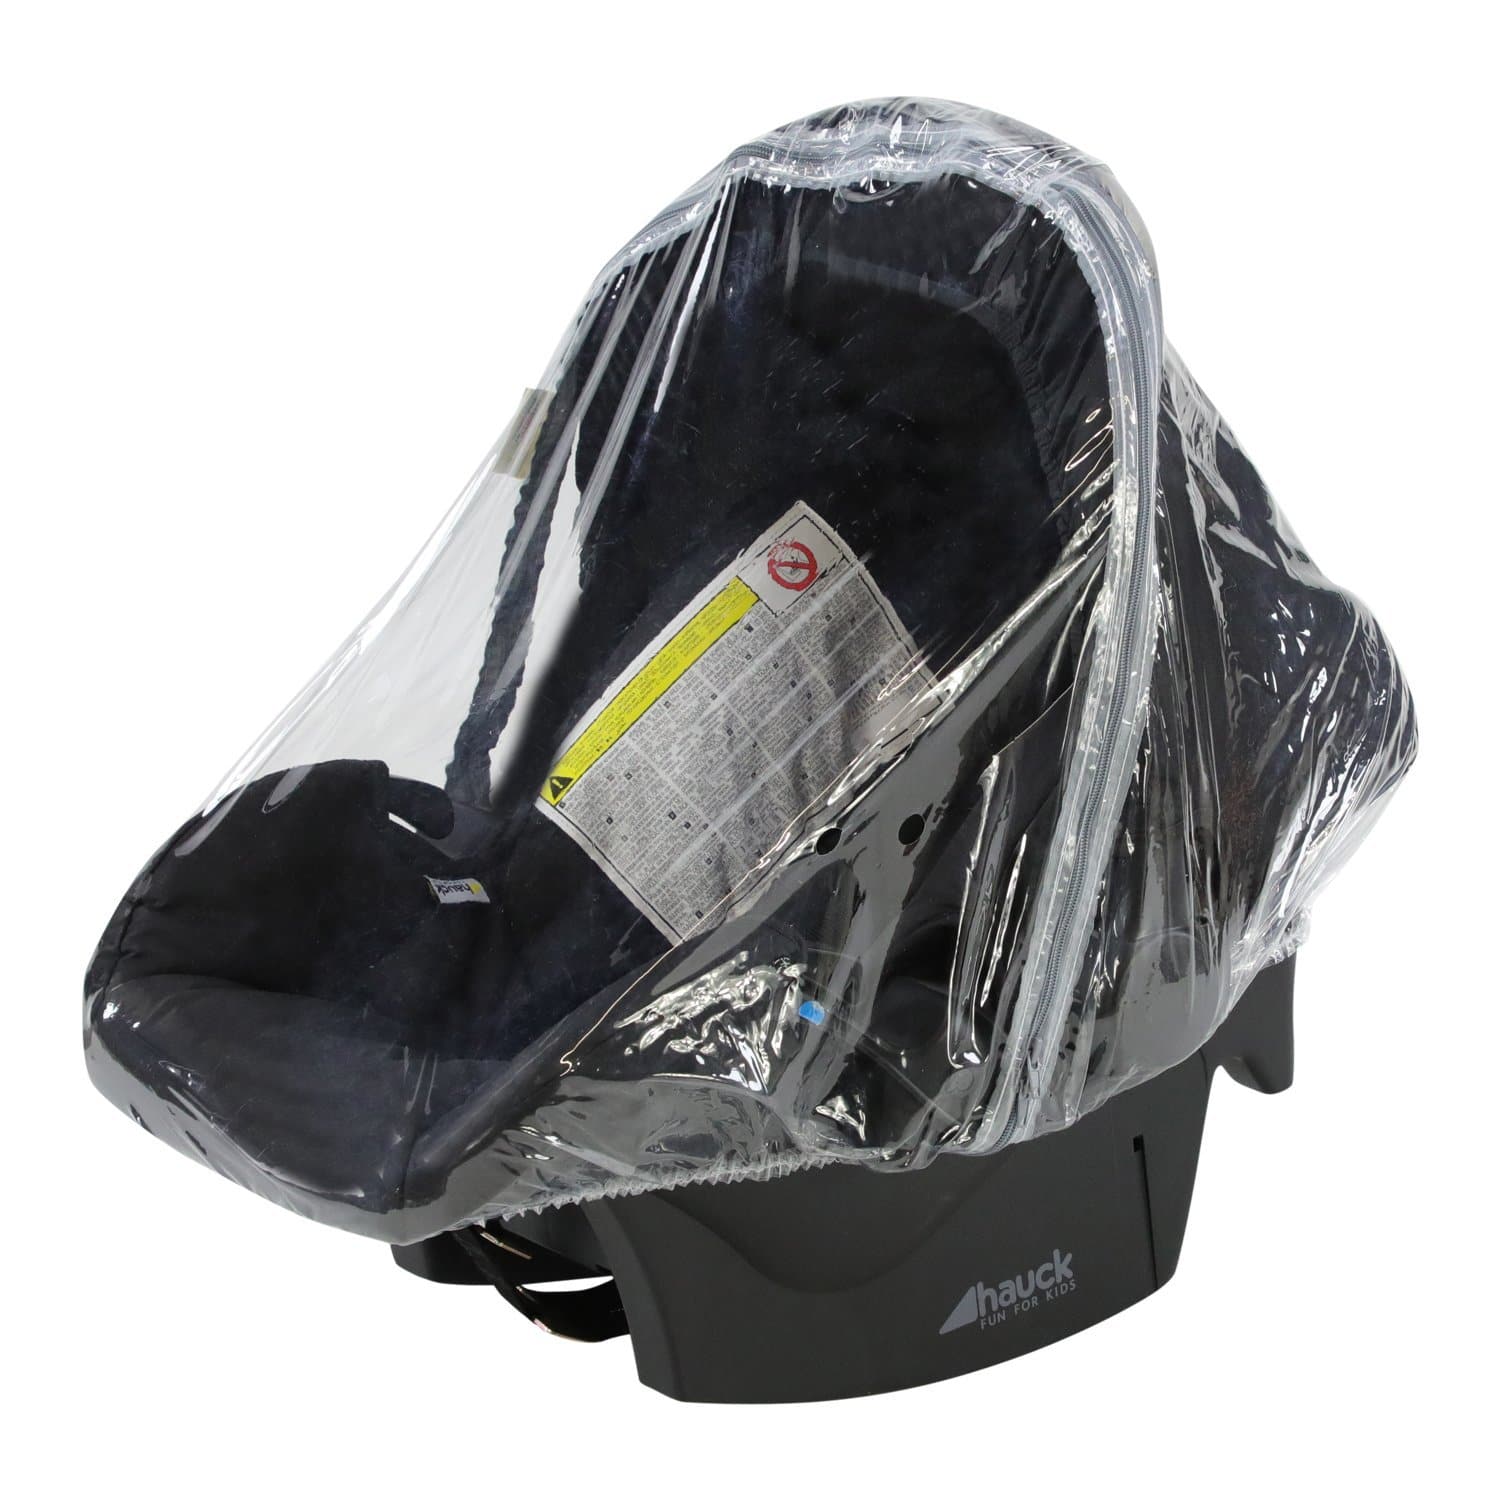 Car Seat Raincover Compatible with Joolz -  | For Your Little One